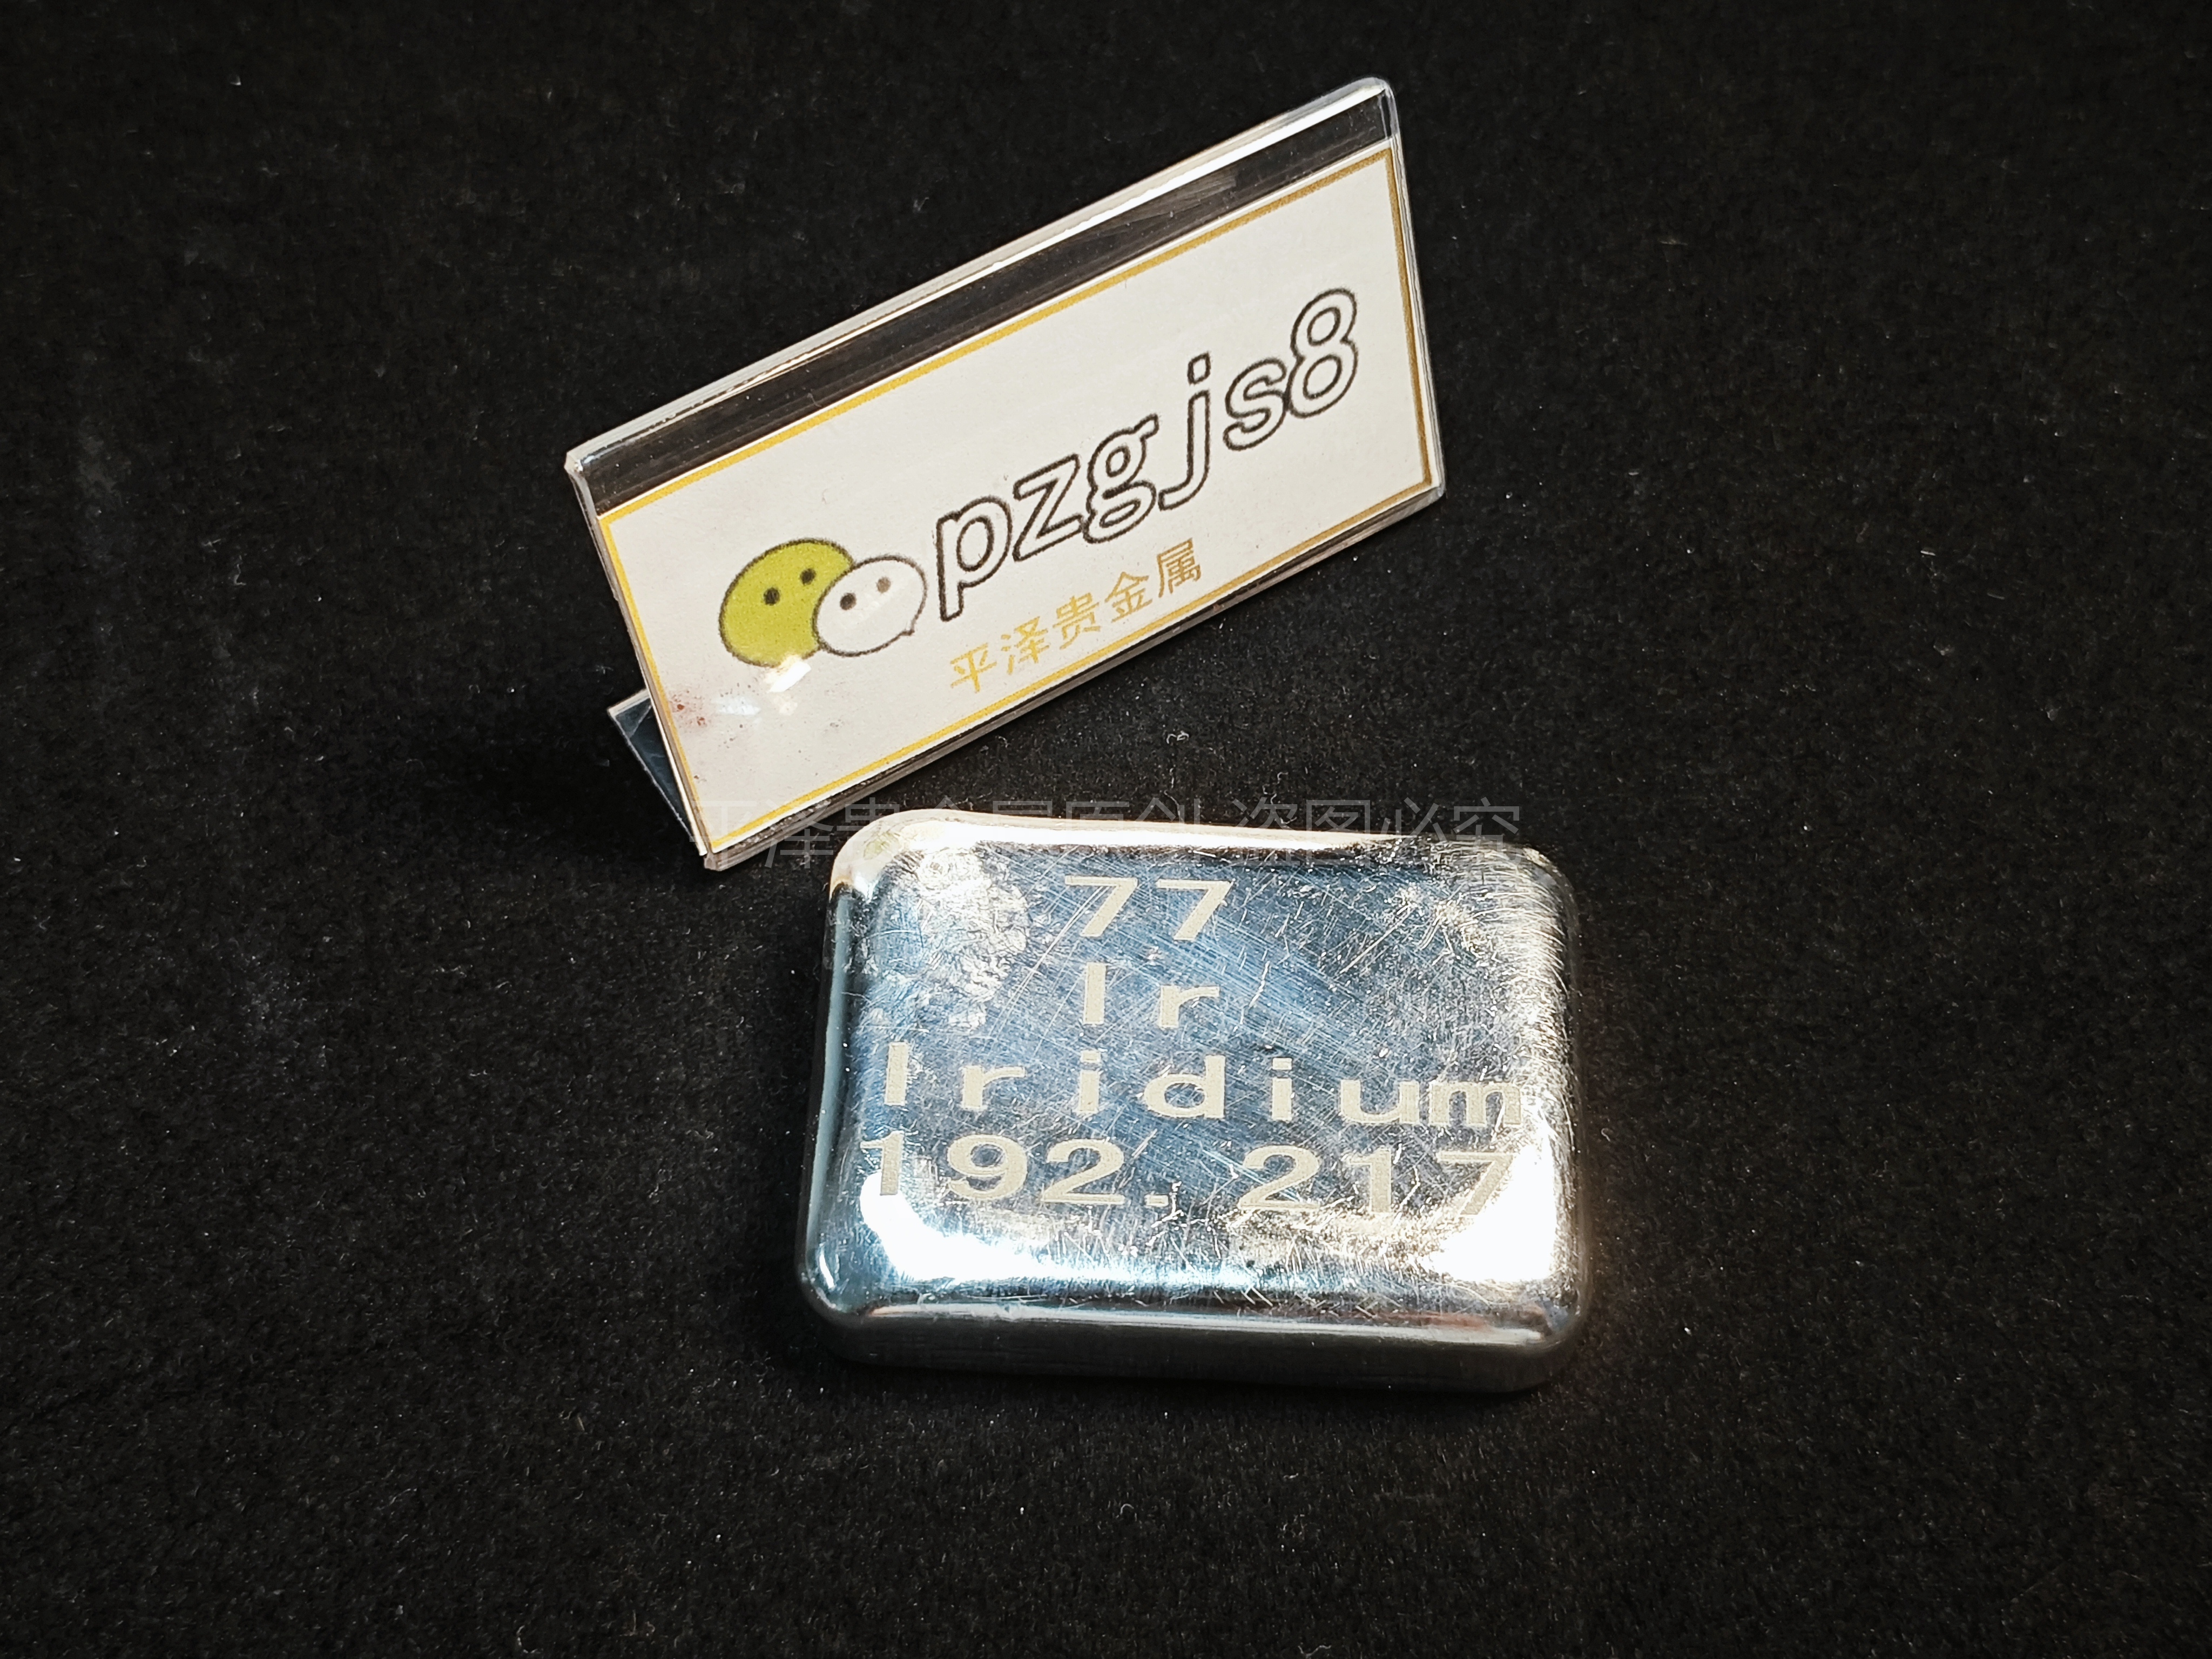 Iridium jewelers for recycling and precious metals recovery services